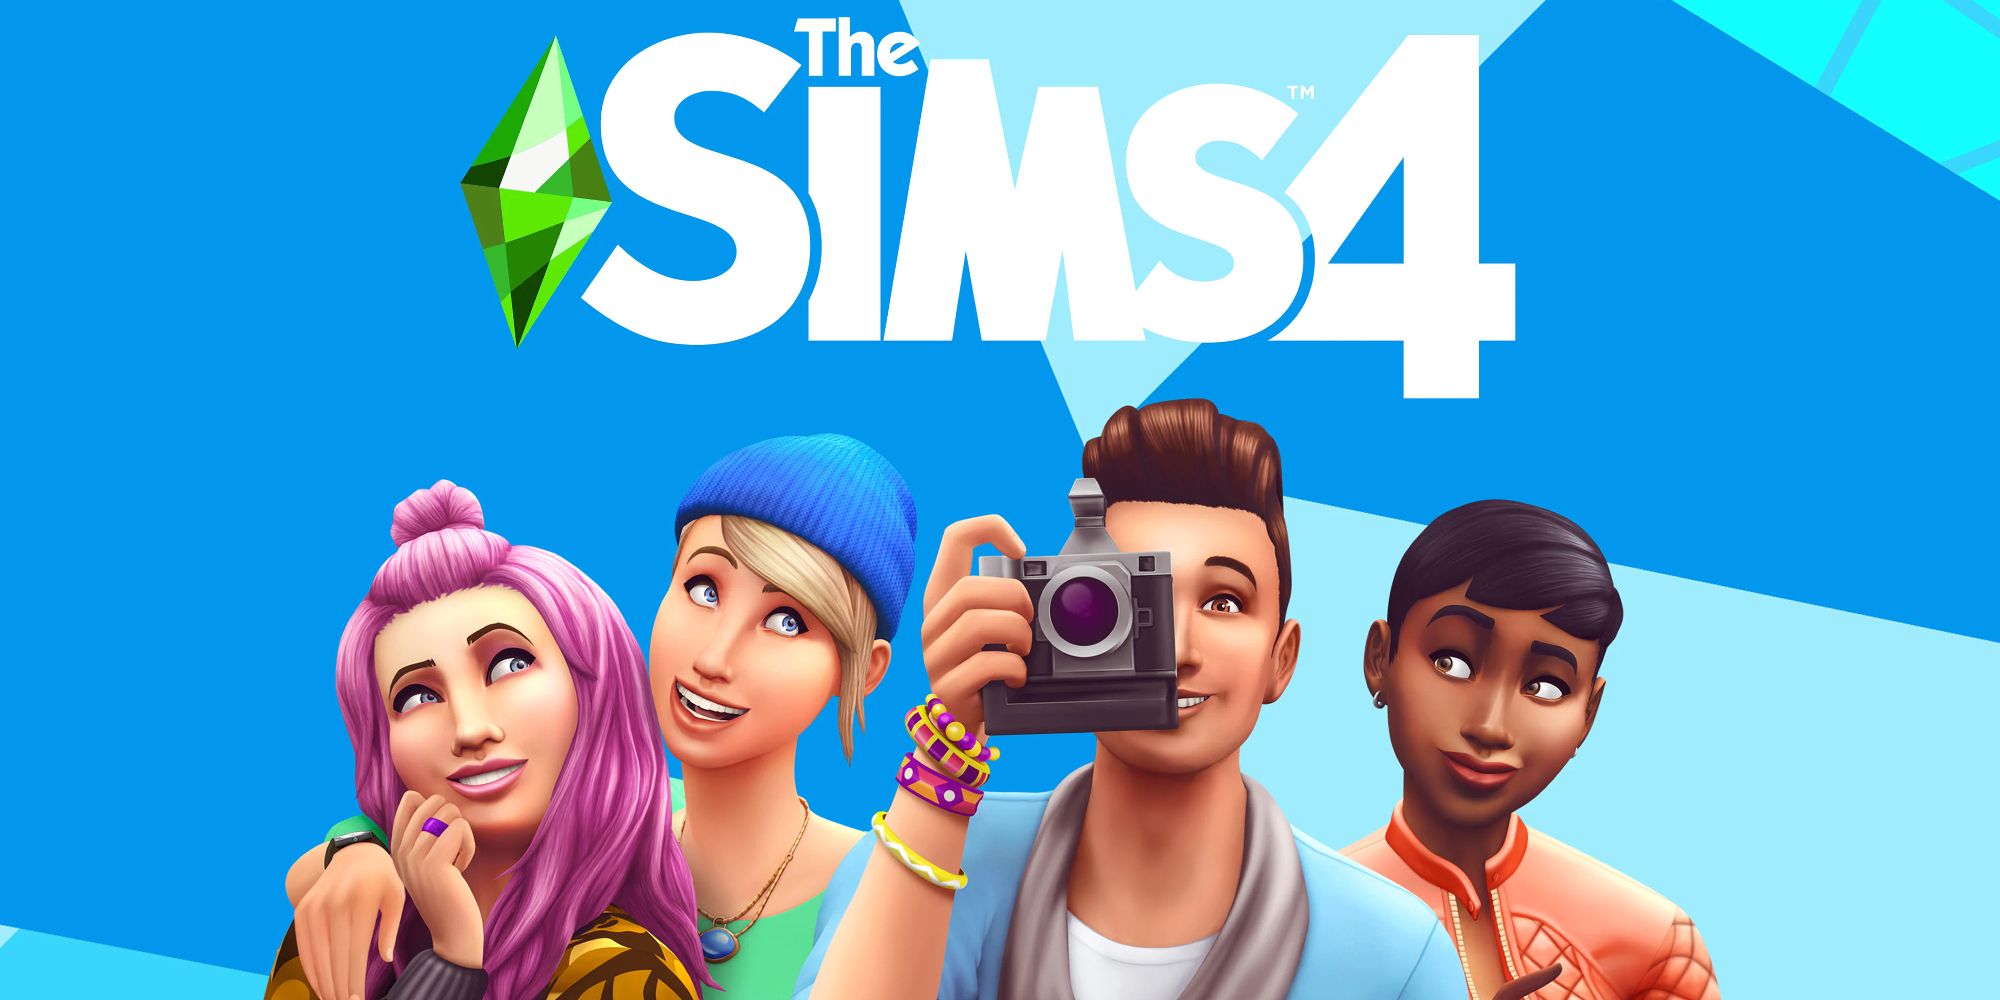 A collection of sims in front of the Sims 4 logo